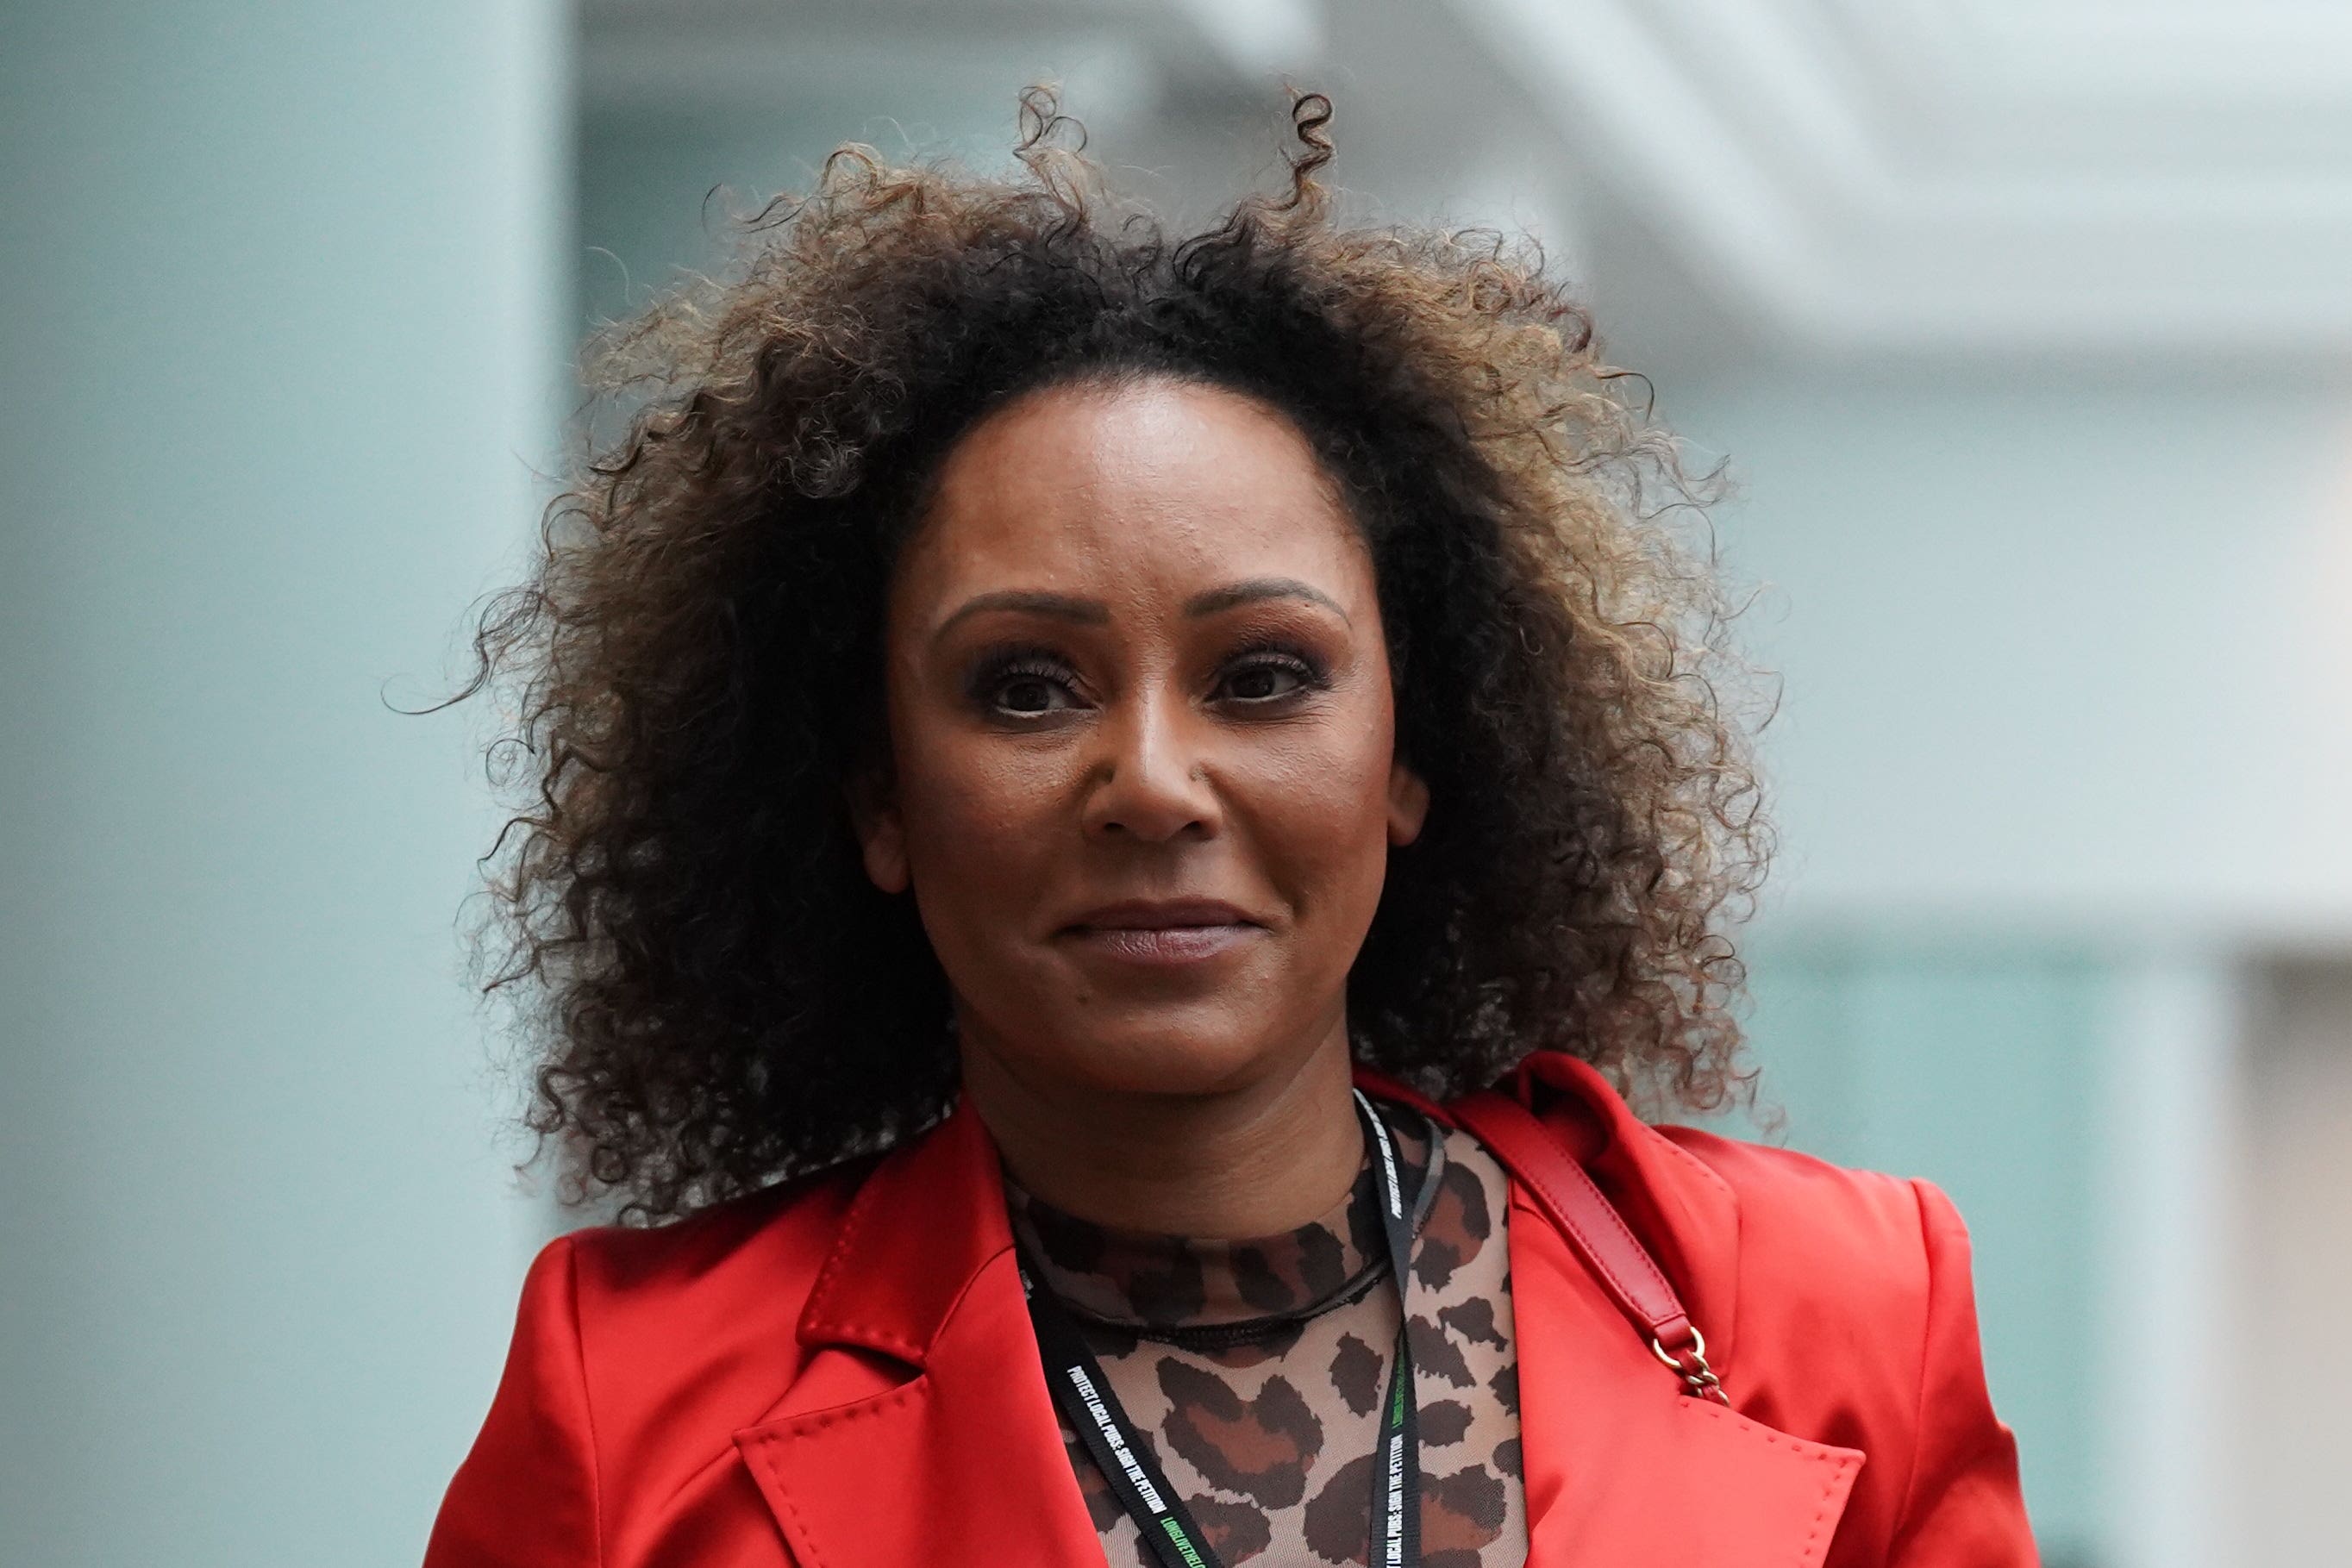 Mel B posted a cryptic tweet about Conor Burns